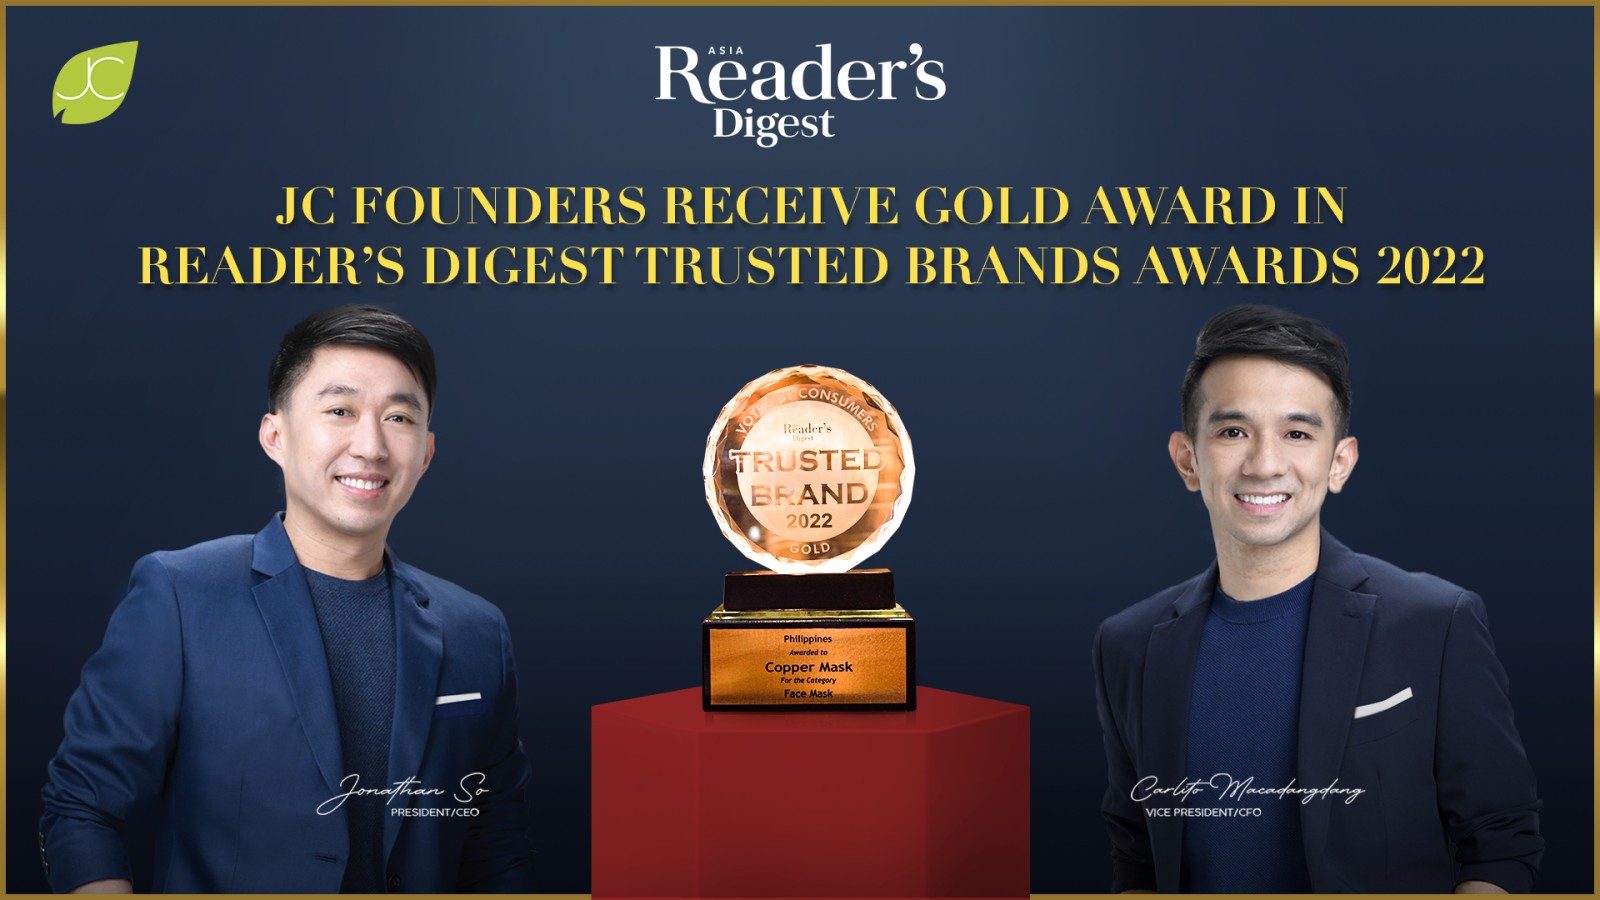 CopperMask by JC wins 2022 Reader’s Digest Trusted Brand award